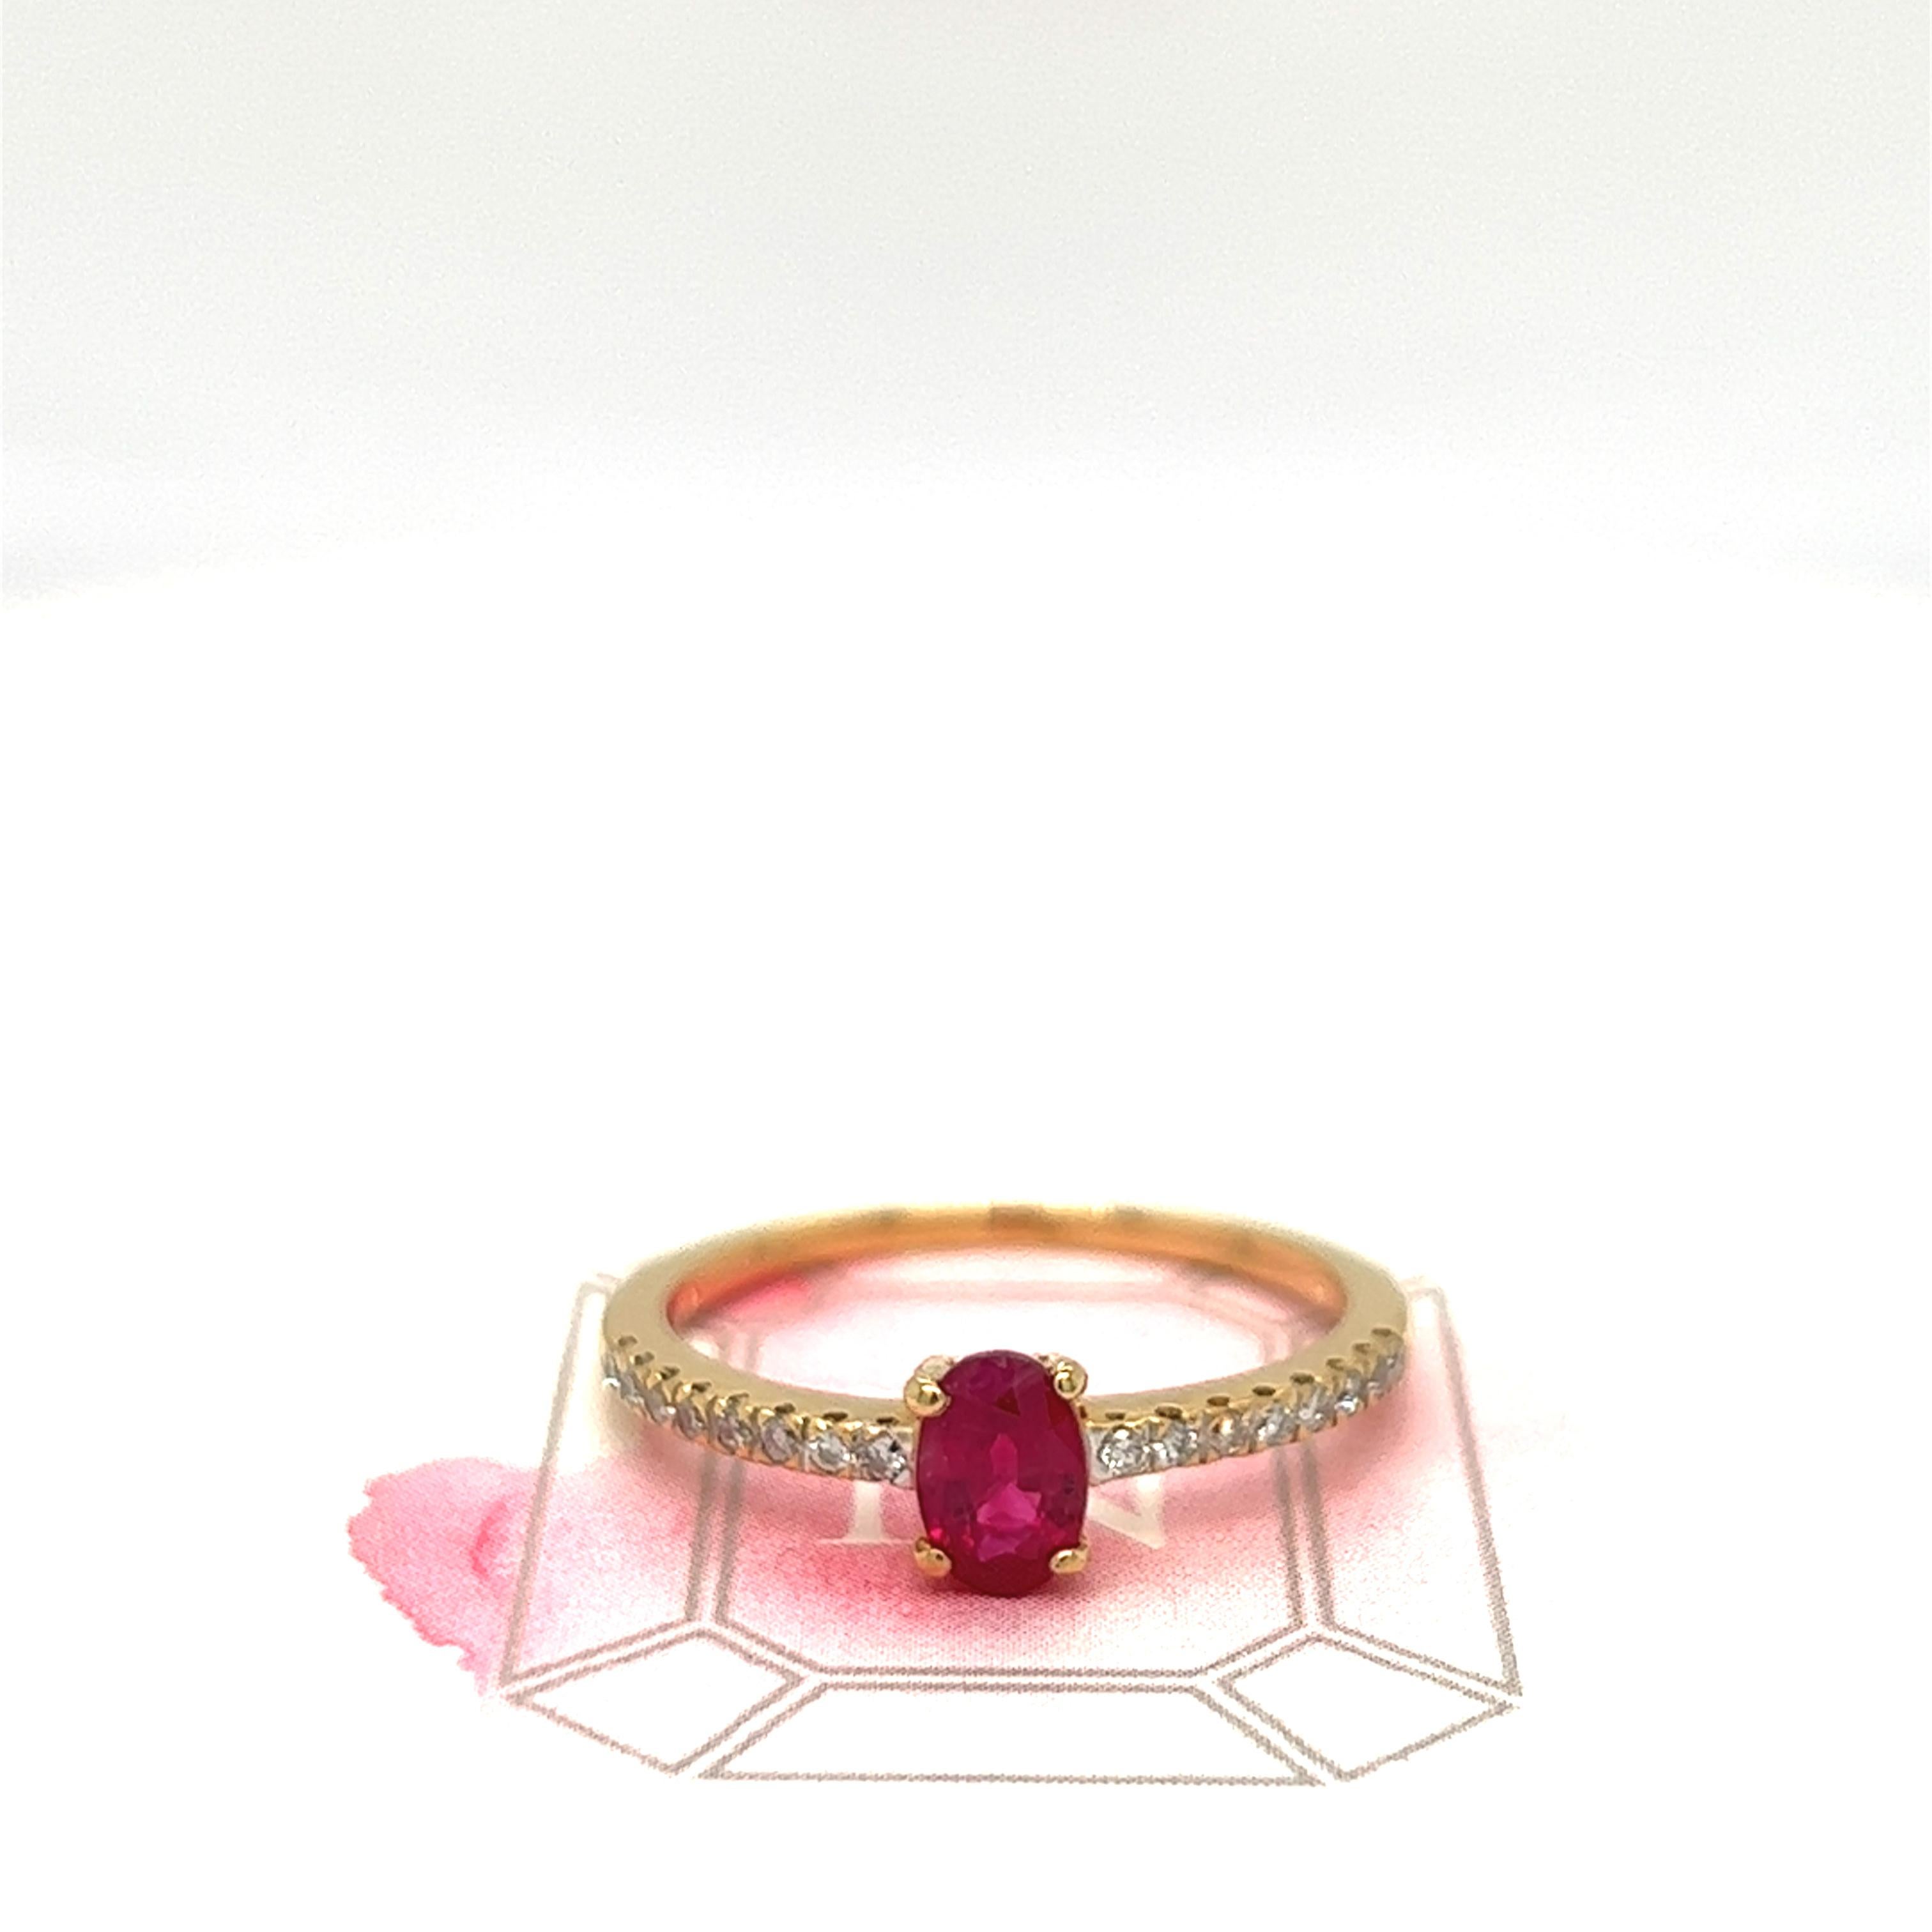 Beautiful vivid red oval-shaped ruby approximately 0.40 carat is at center of this beautiful ring. Small colorless diamonds glitter on its shoulders half way down for comfortable wear. The ring was crafted in 18K yellow gold with modern and simple